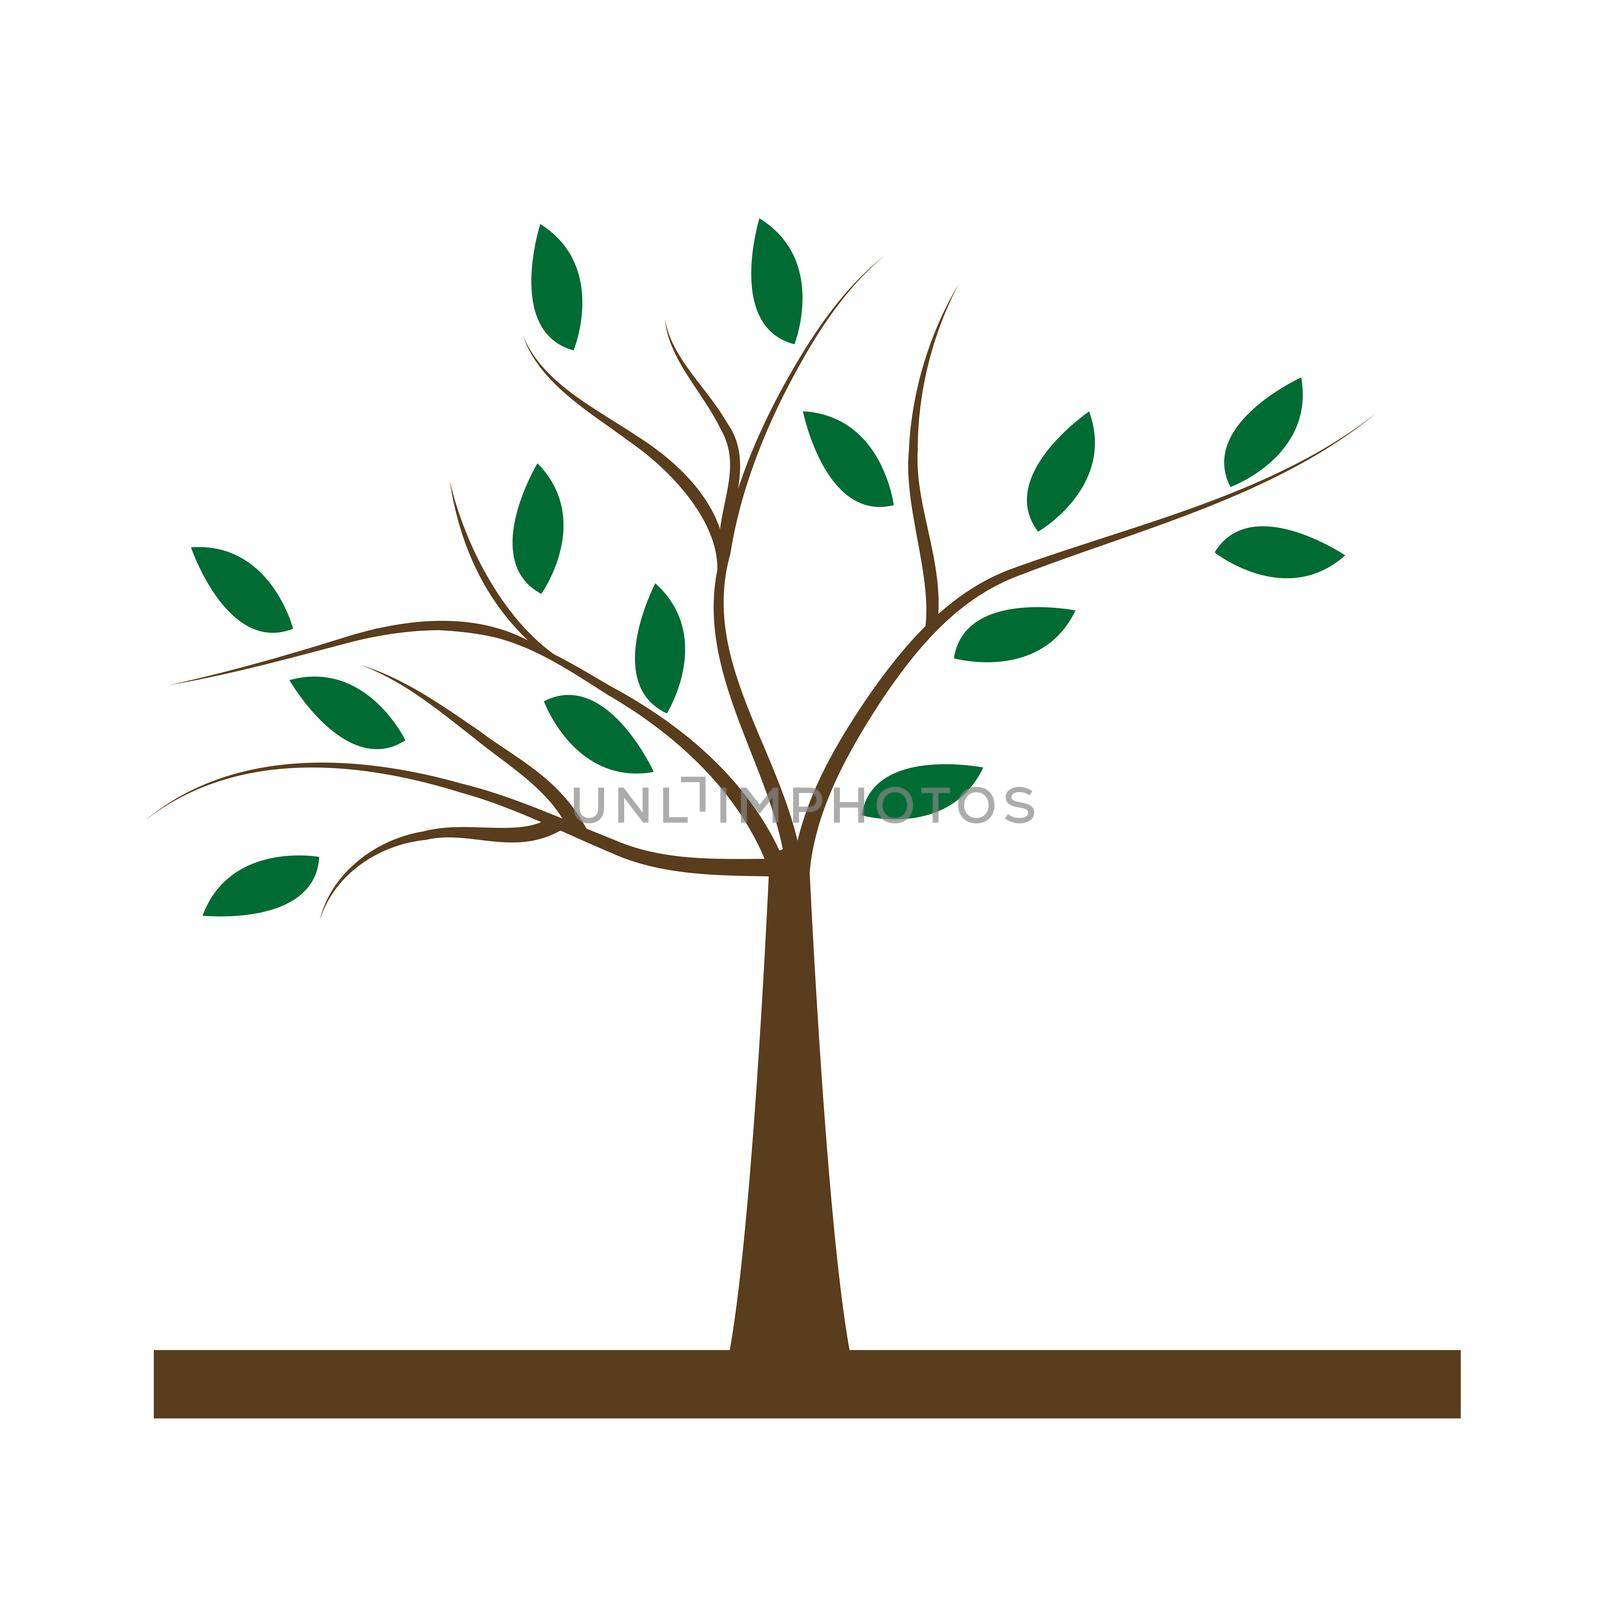 Simple flat icon of a tree